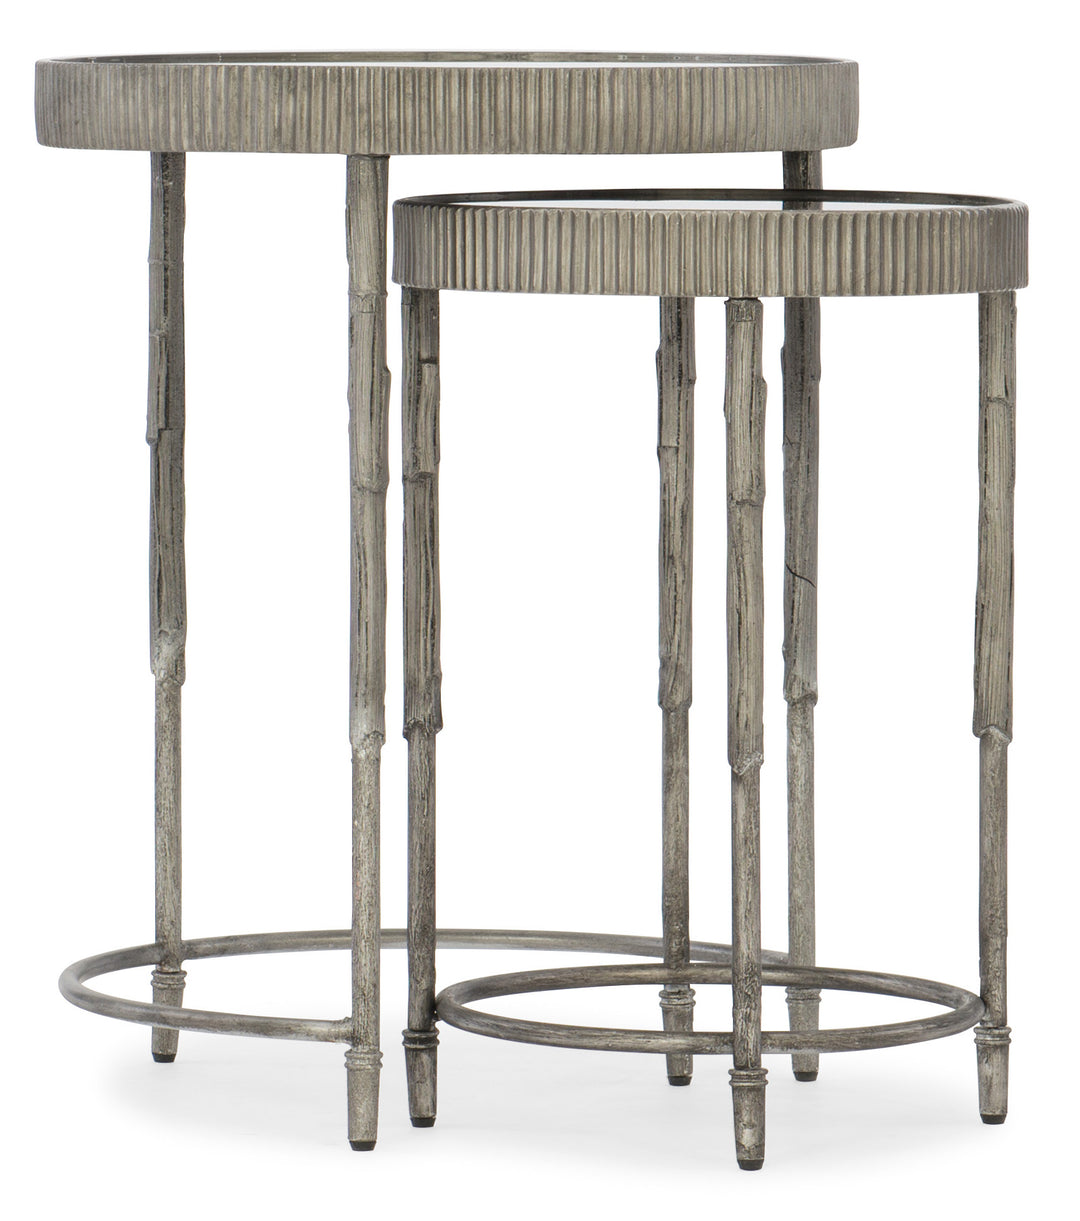 American Home Furniture | Hooker Furniture - Accent Nesting Tables